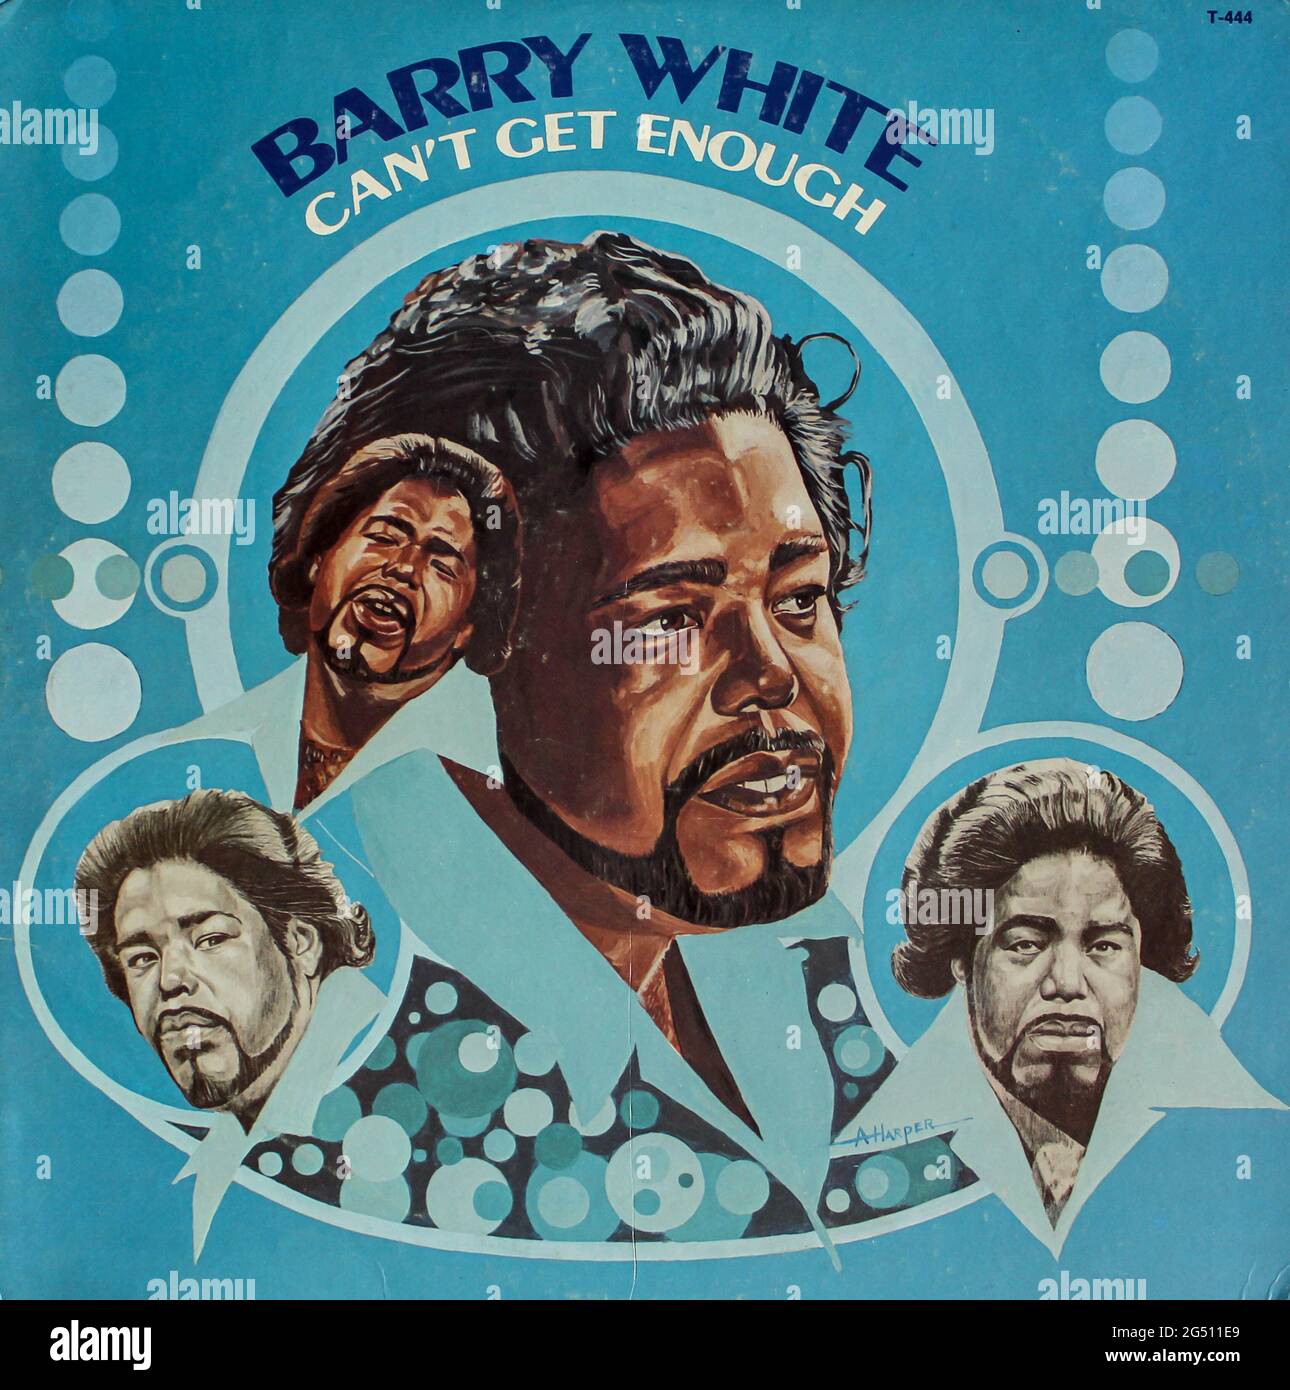 R&B, disco and soul artist Barry White music album on vinyl record LP disc. Titled: Can't Get Enough album cover Stock Photo